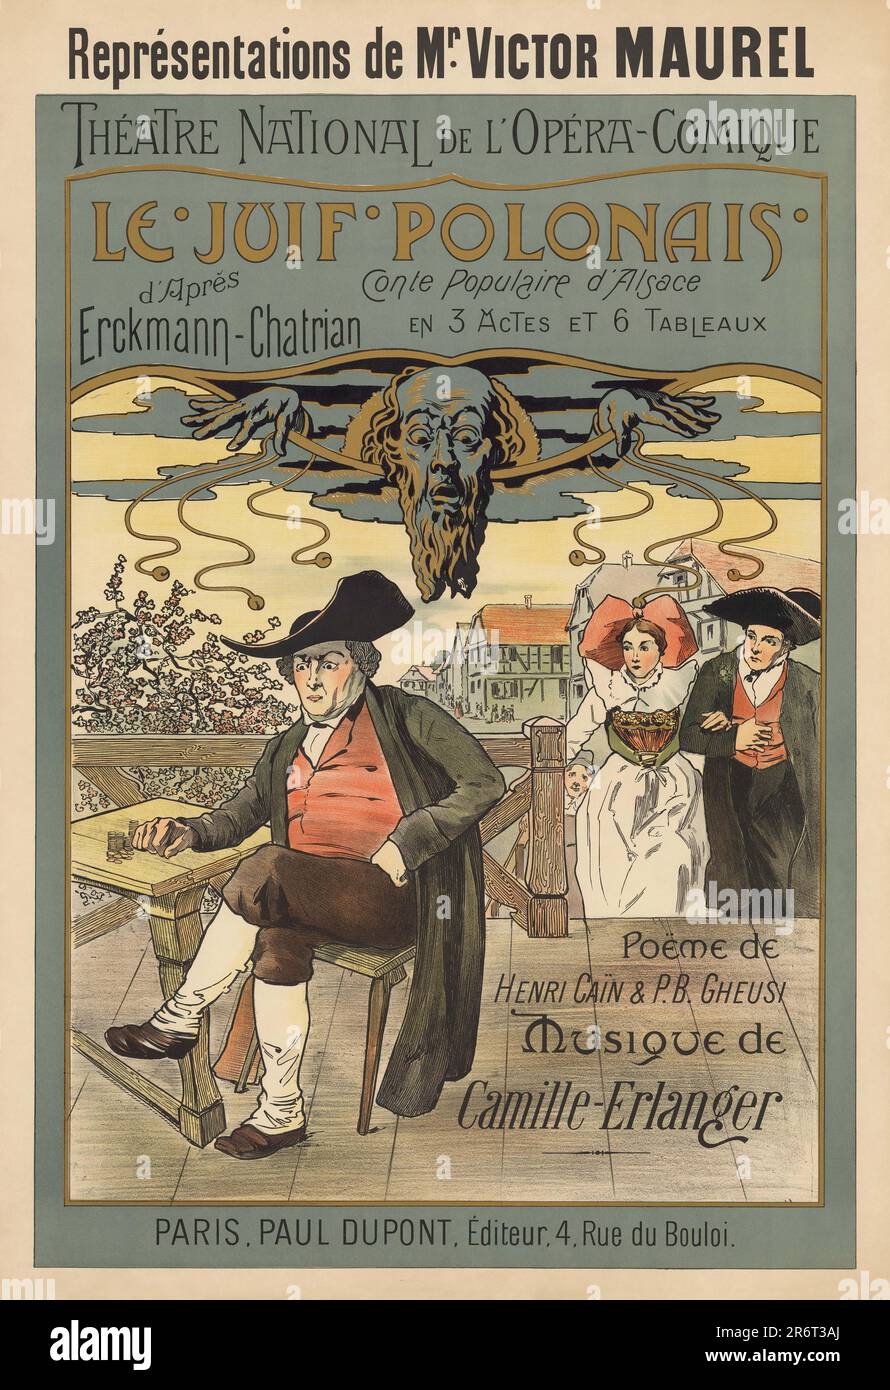 Poster for the Opera Le Juif polonais (The Polish Jew) by Camille Erlanger. Museum: PRIVATE COLLECTION. Author: Henri C. R. Presseq. Stock Photo